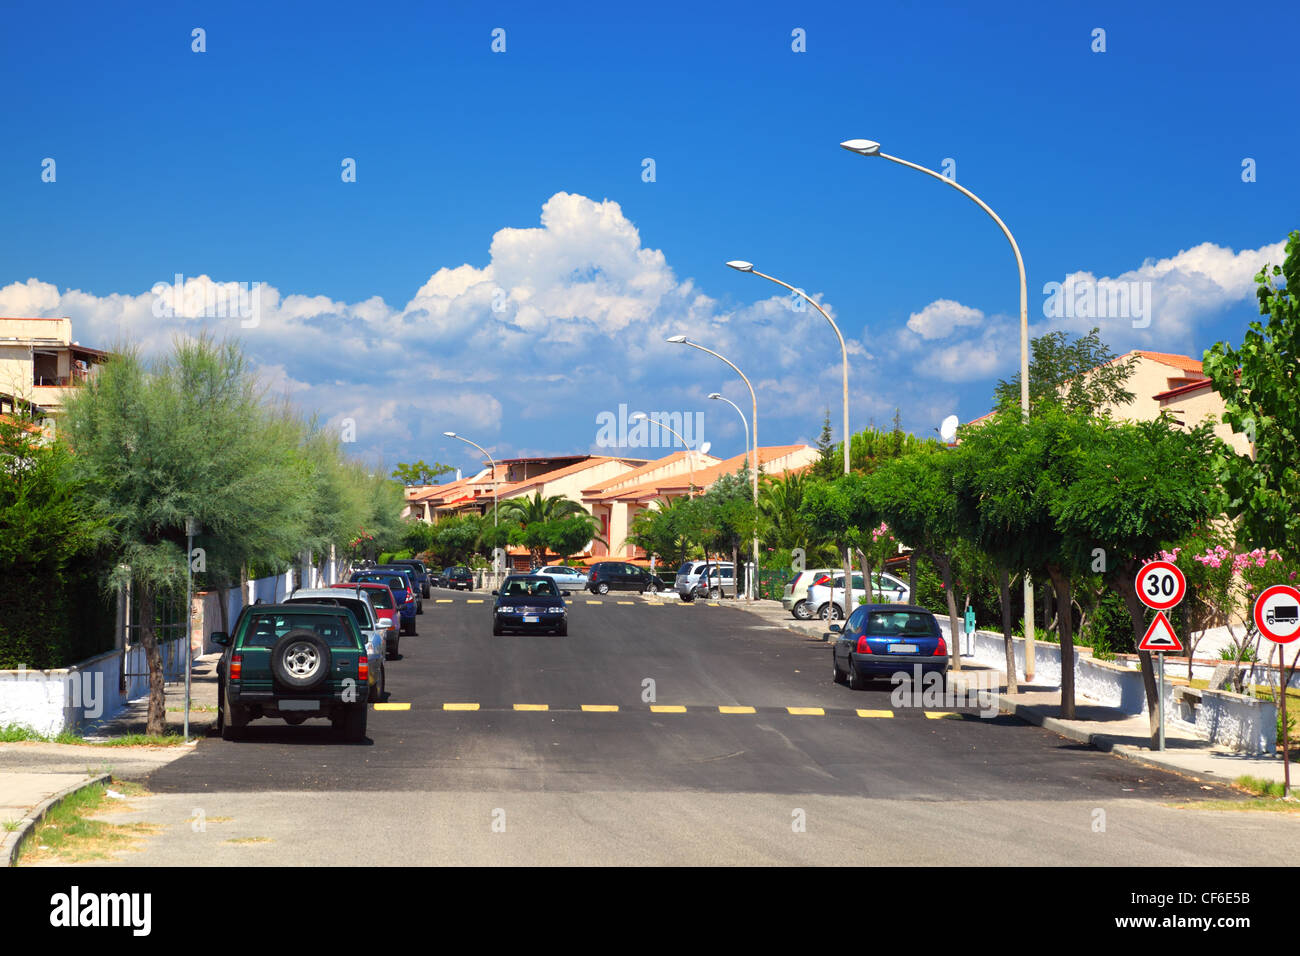 Cars drive on road and on the sidewalks are palm trees in residential area. Stock Photo